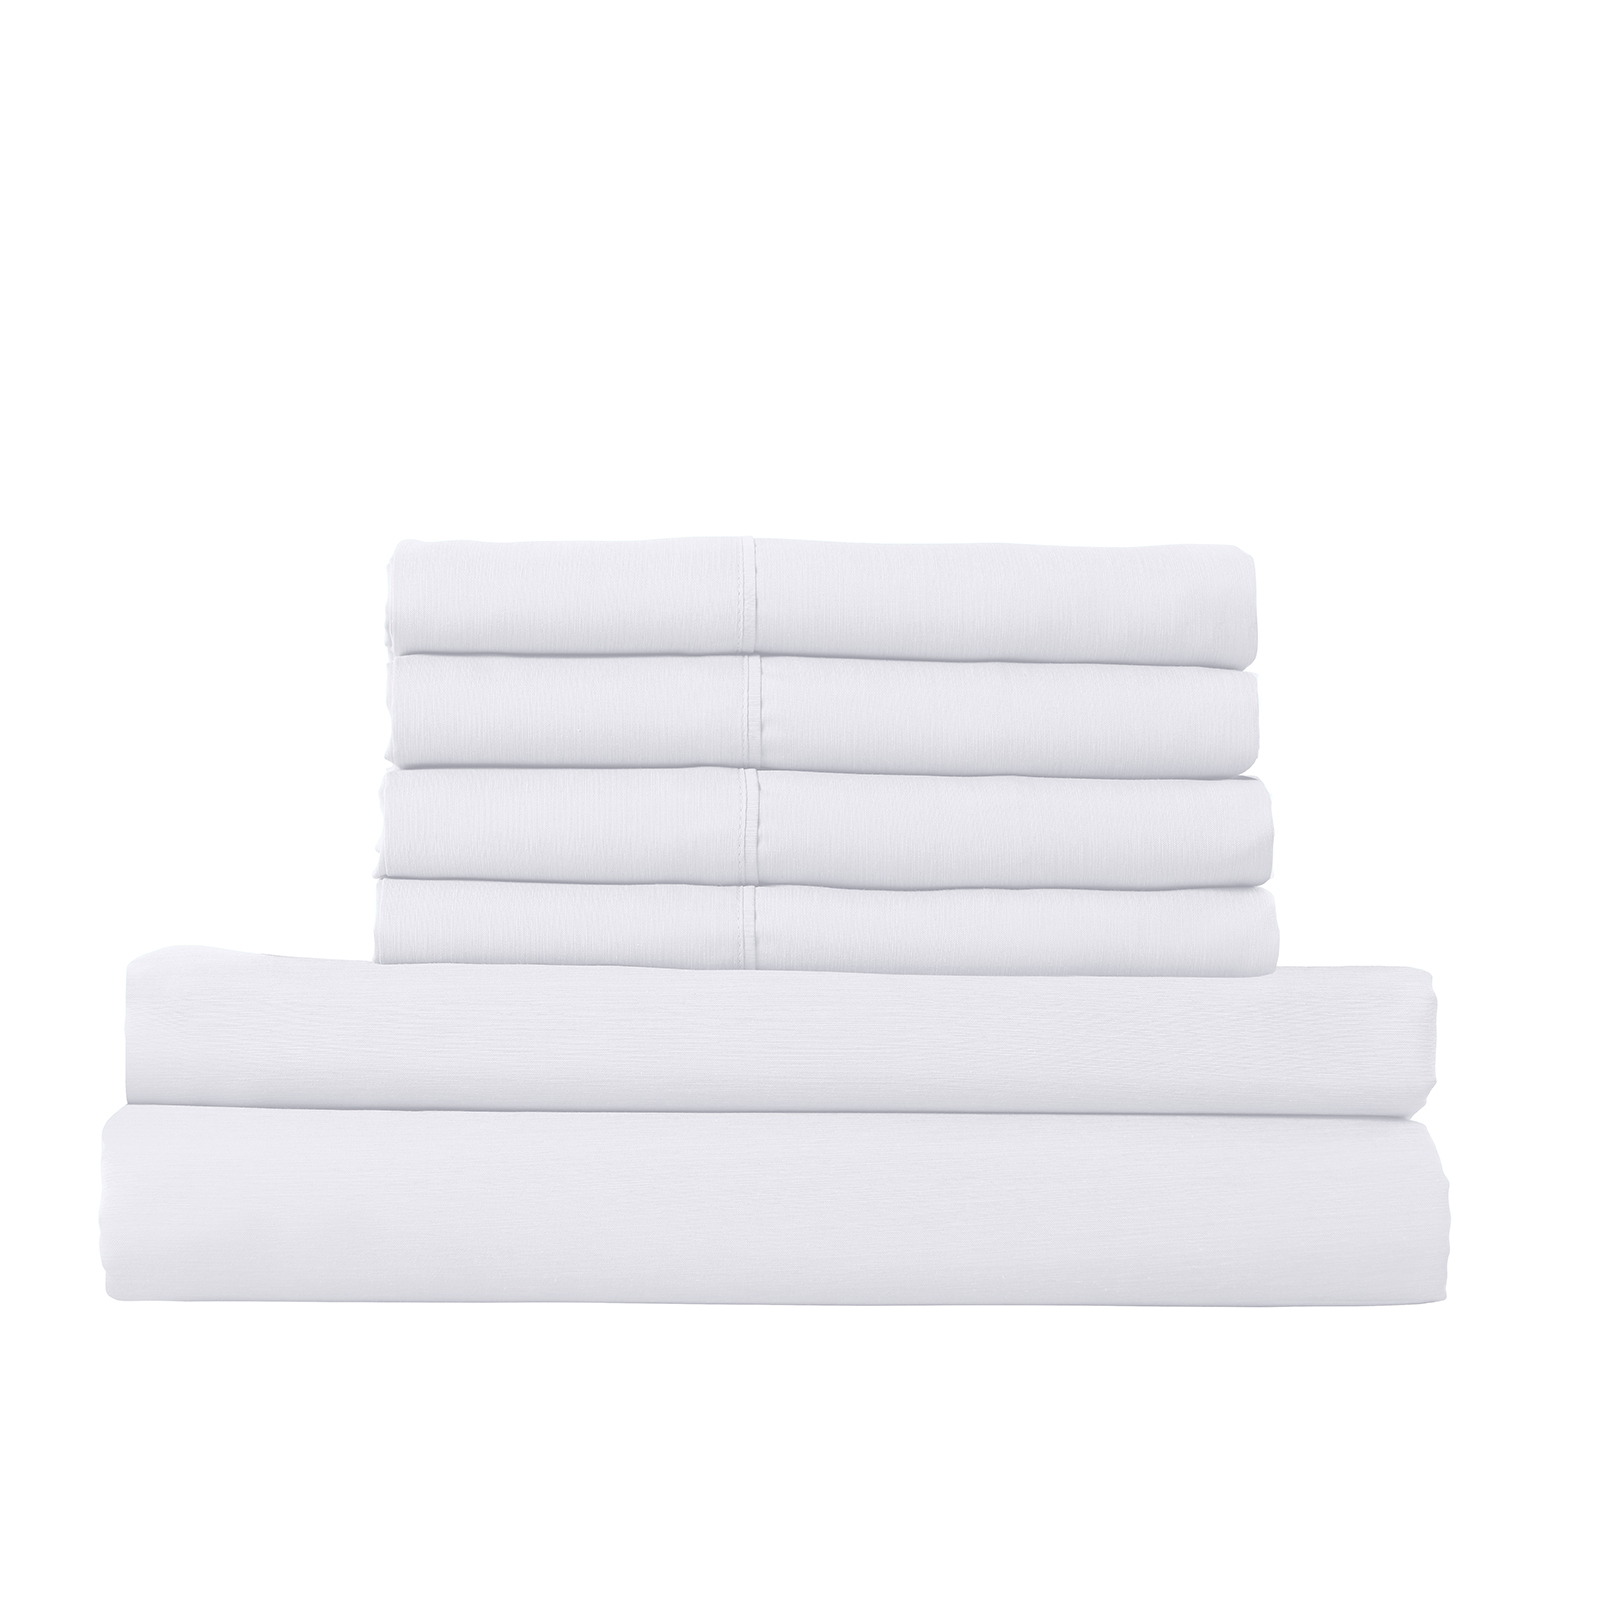 Royal Comfort 1500 Thread Count 6 Piece Cotton Rich Bedroom Collection Set - Queen - White